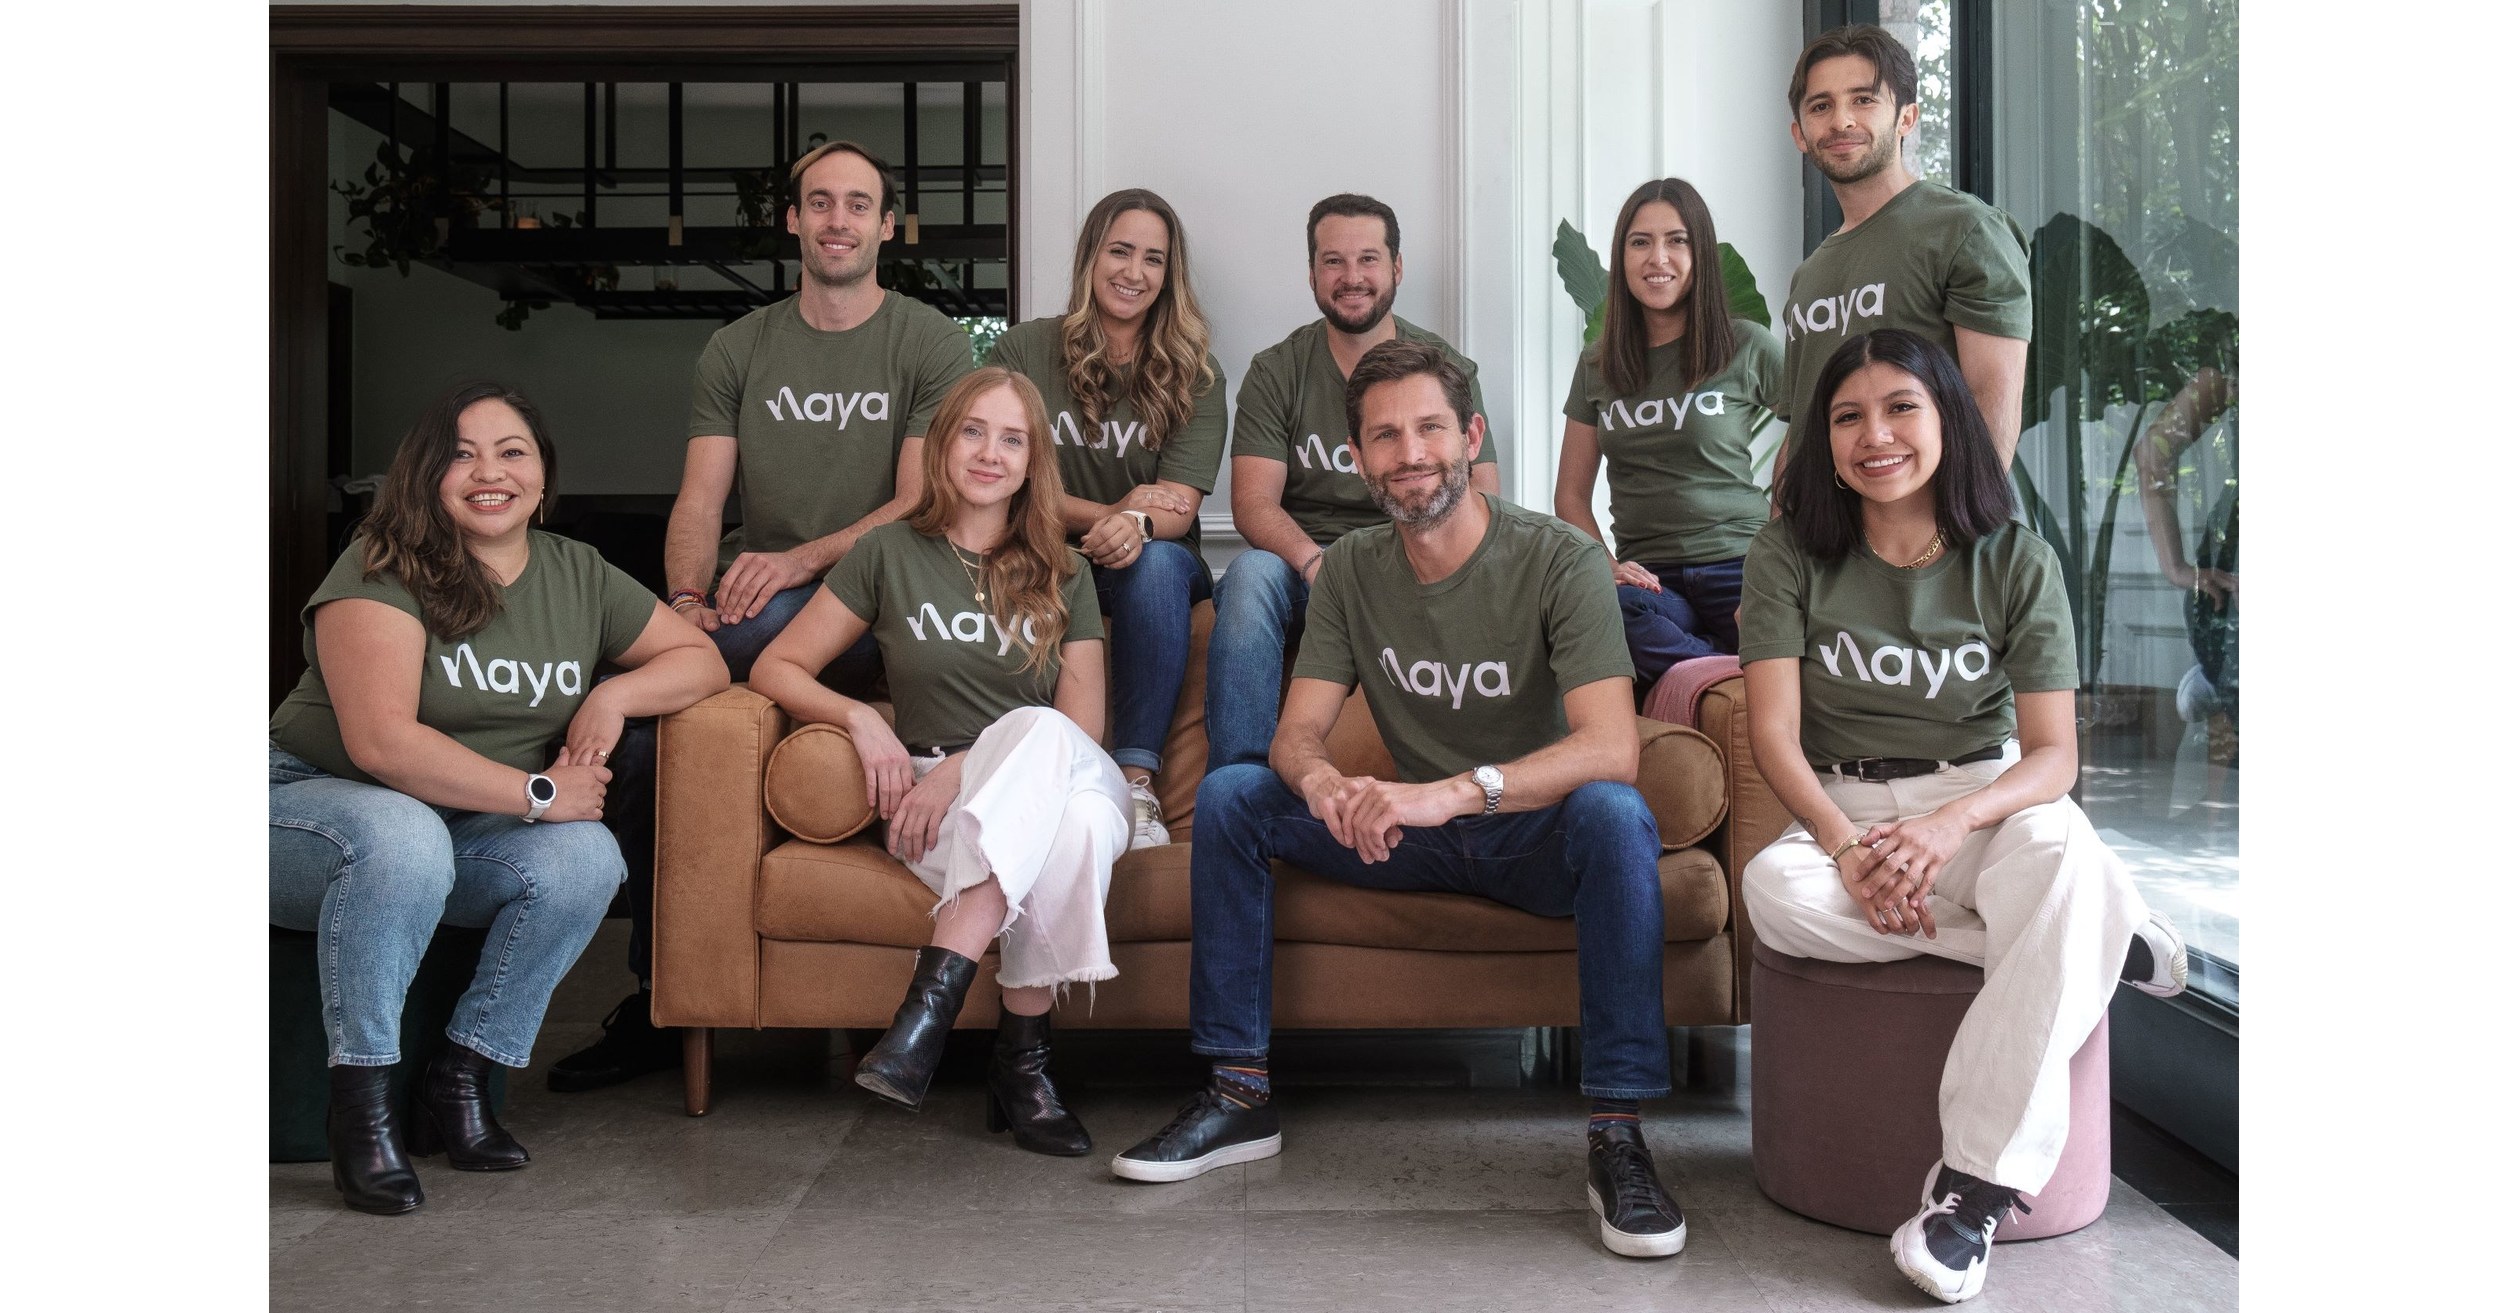 LATAM's newest PropTech company Naya Homes raises $5M seed round to empower property owners to maximize the profitability of their real estate through short-term rentals